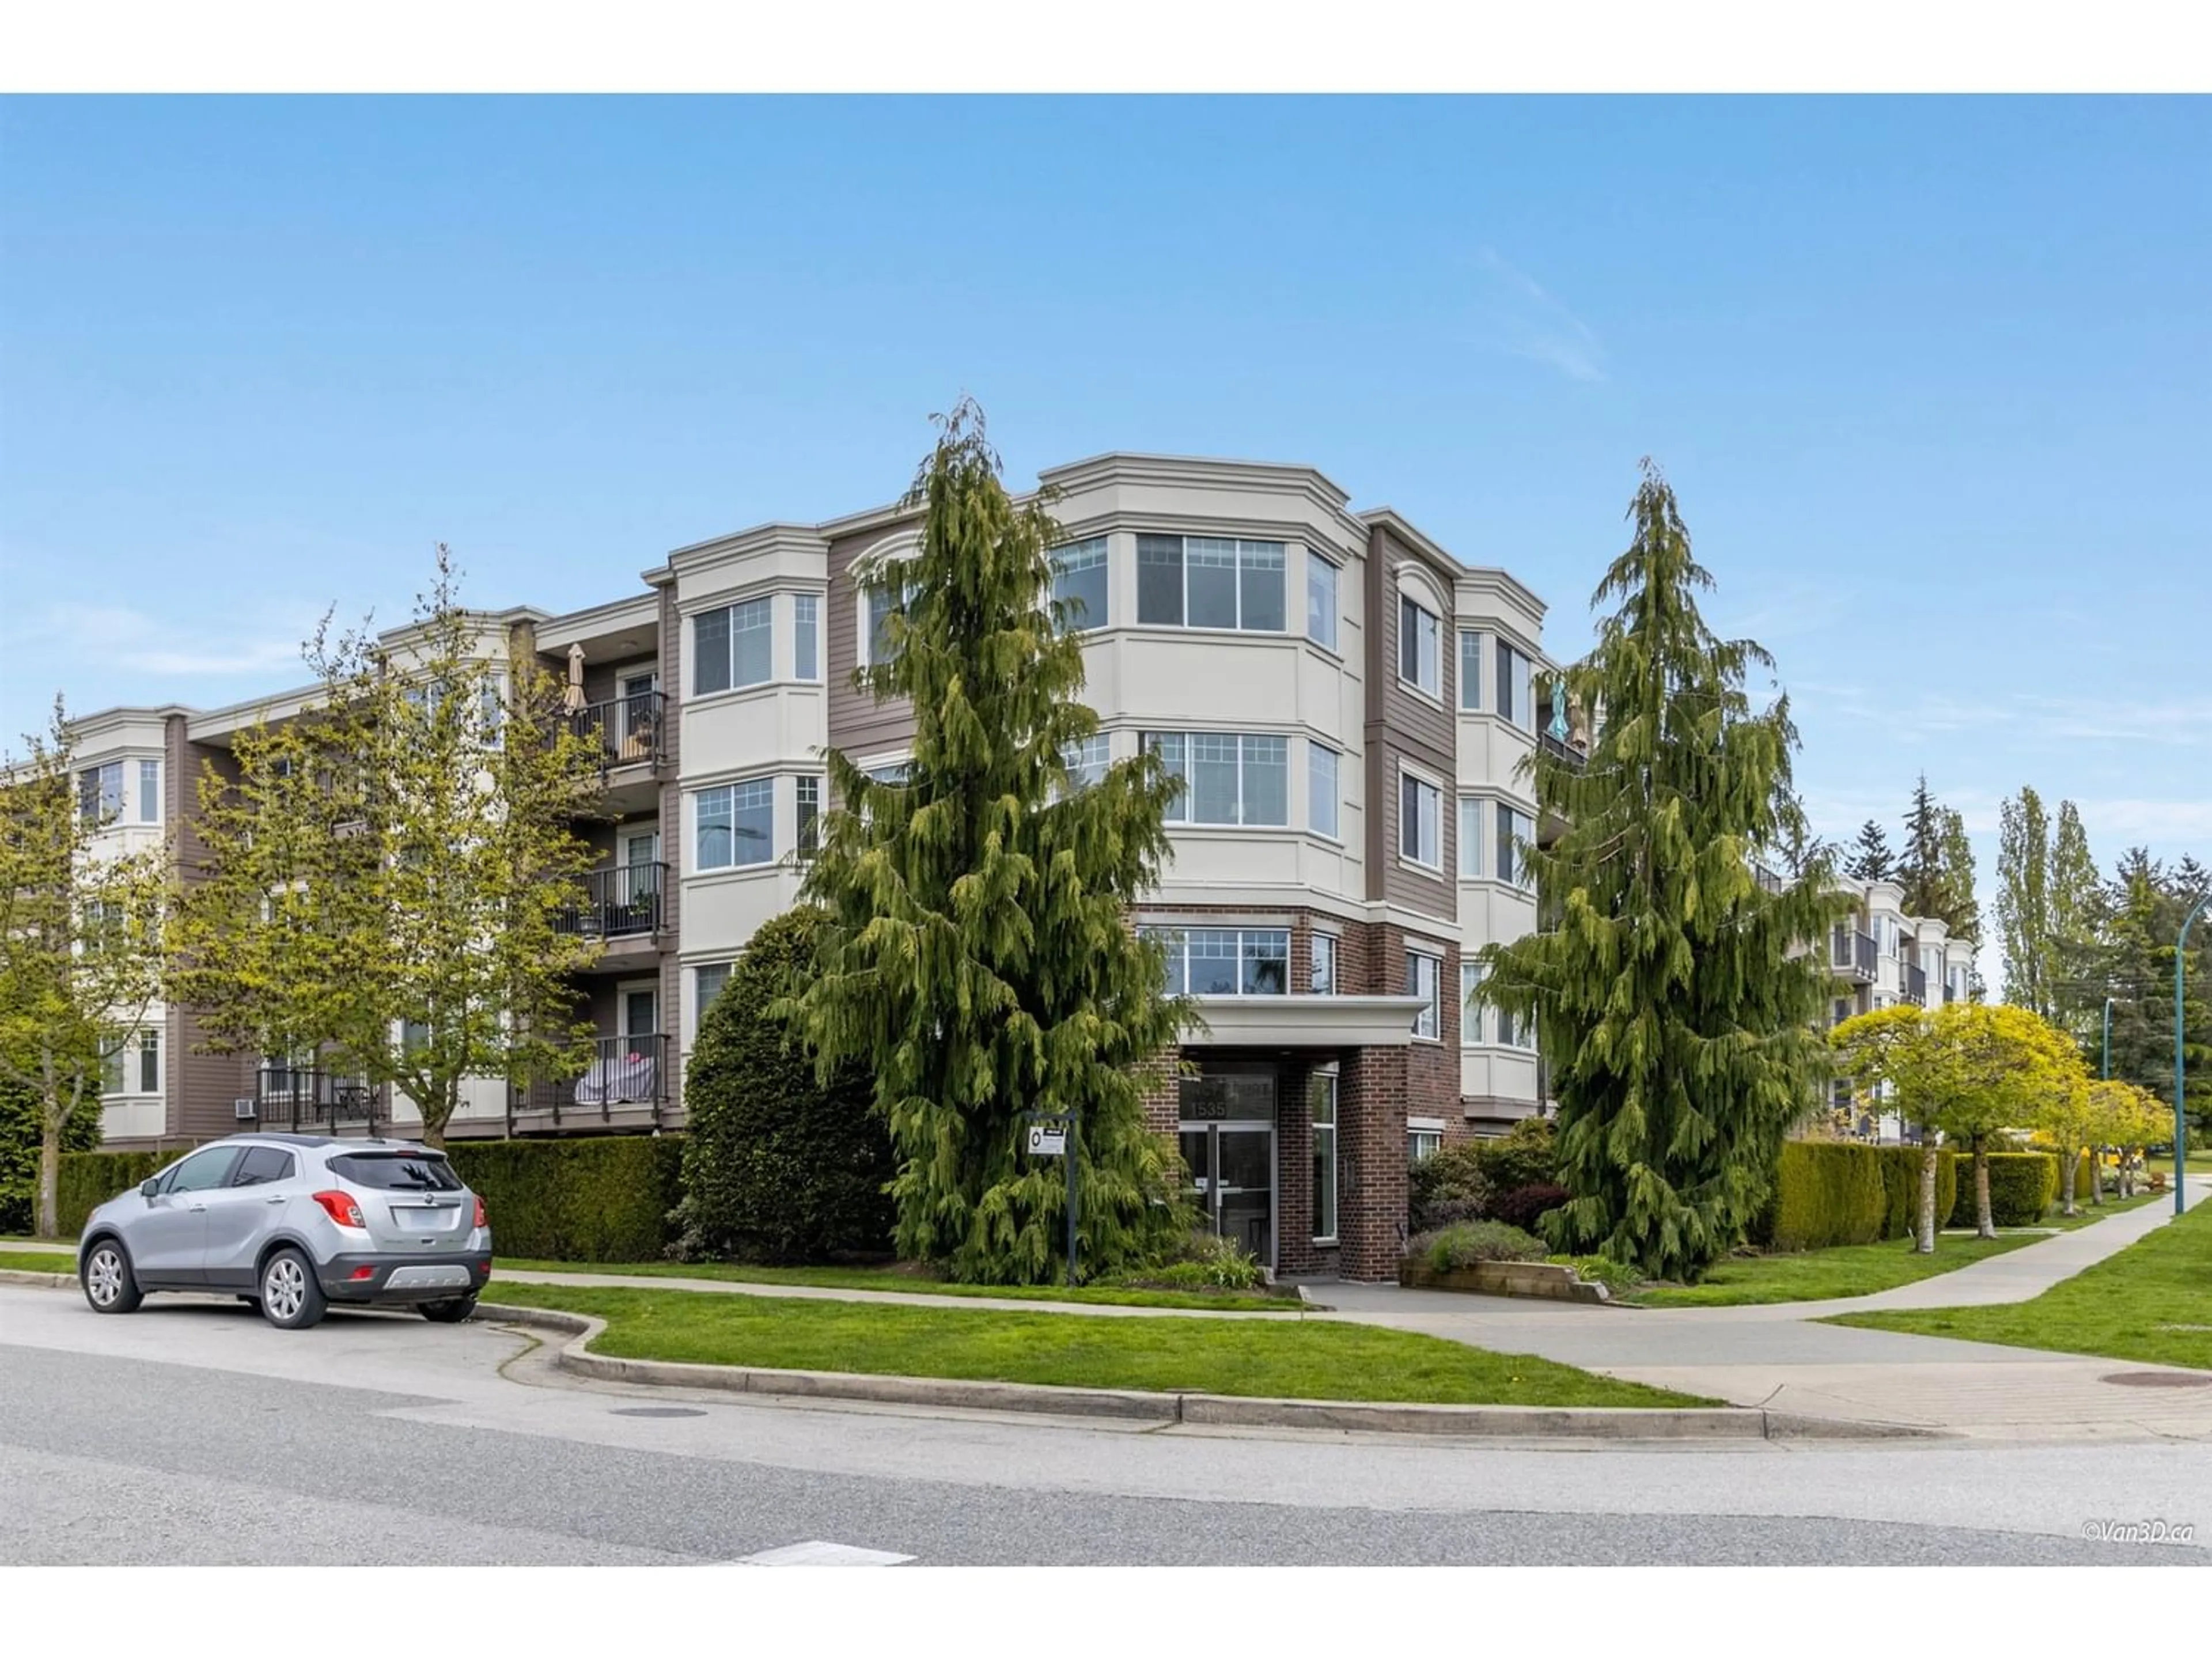 A pic from exterior of the house or condo for 309 15357 ROPER AVENUE, White Rock British Columbia V4B2G2